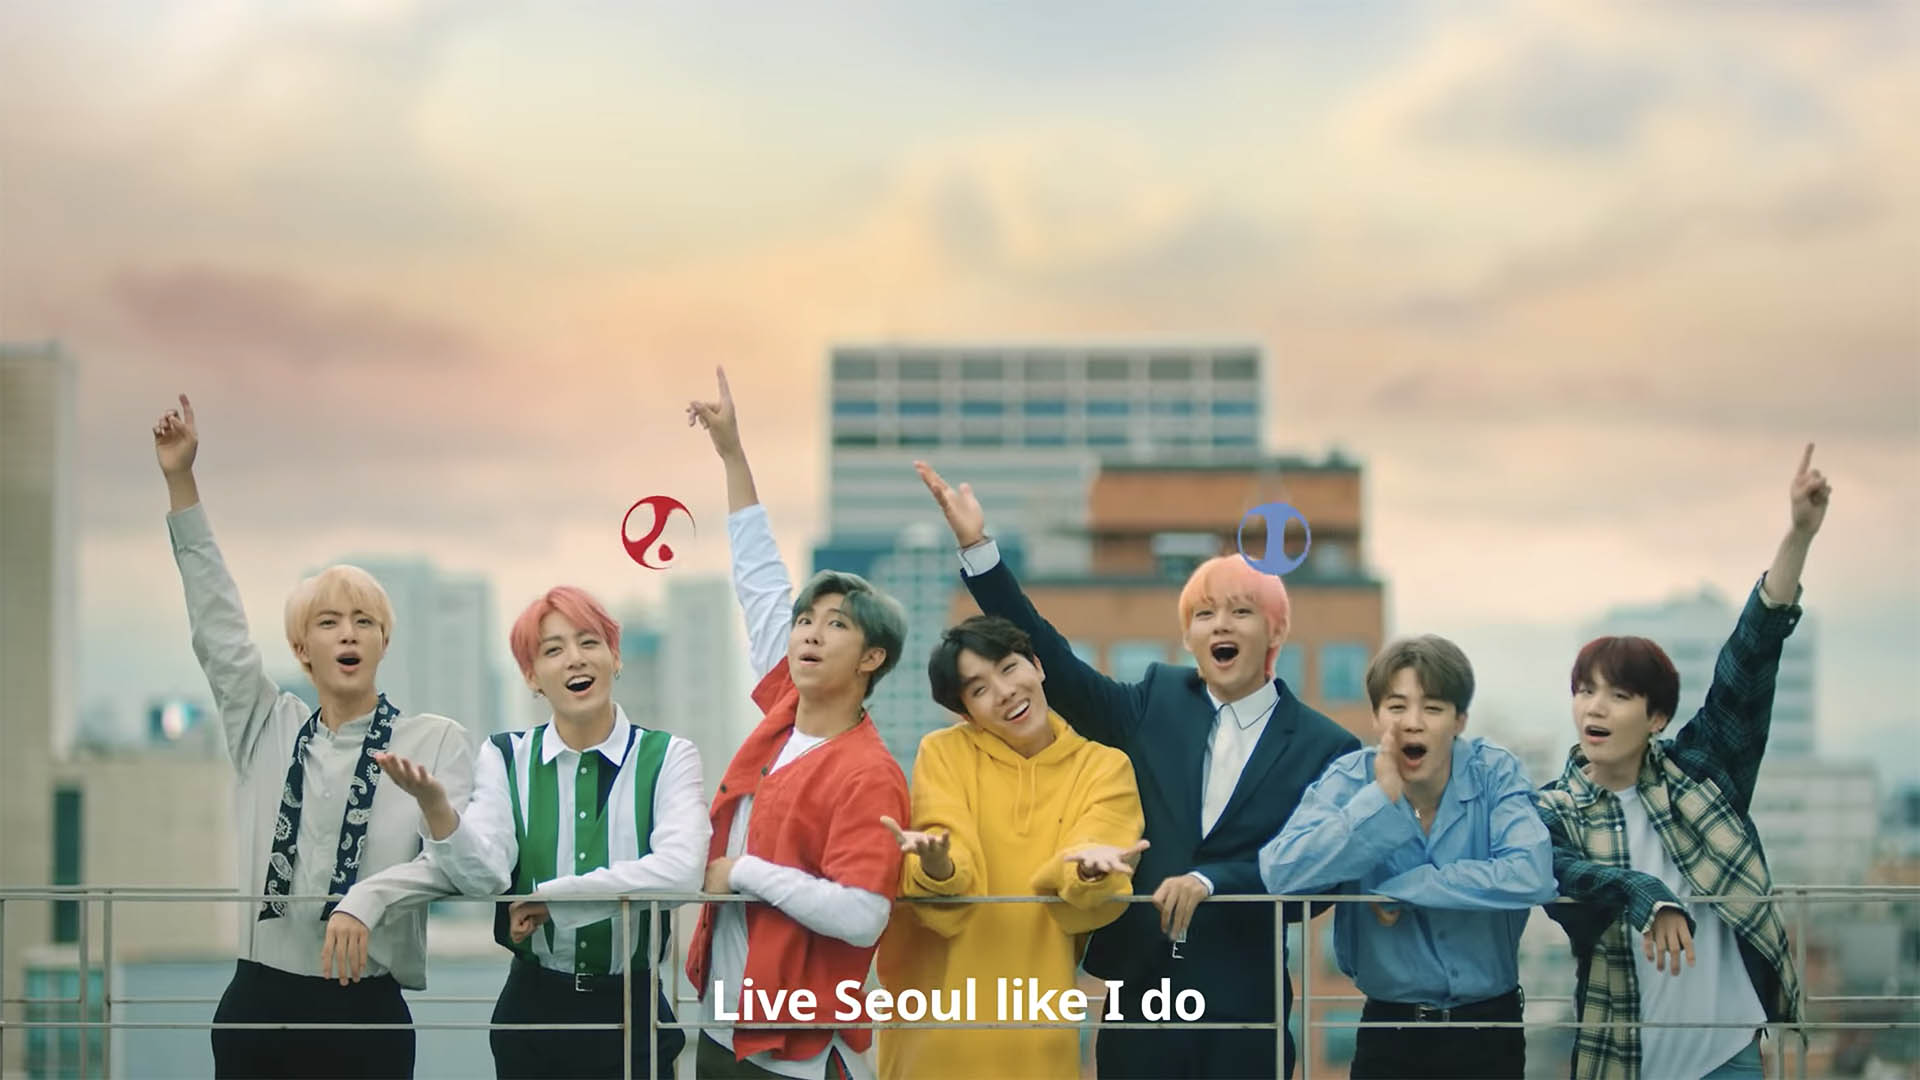 Are you ready to explore the city of Seoul just like the members of BTS?